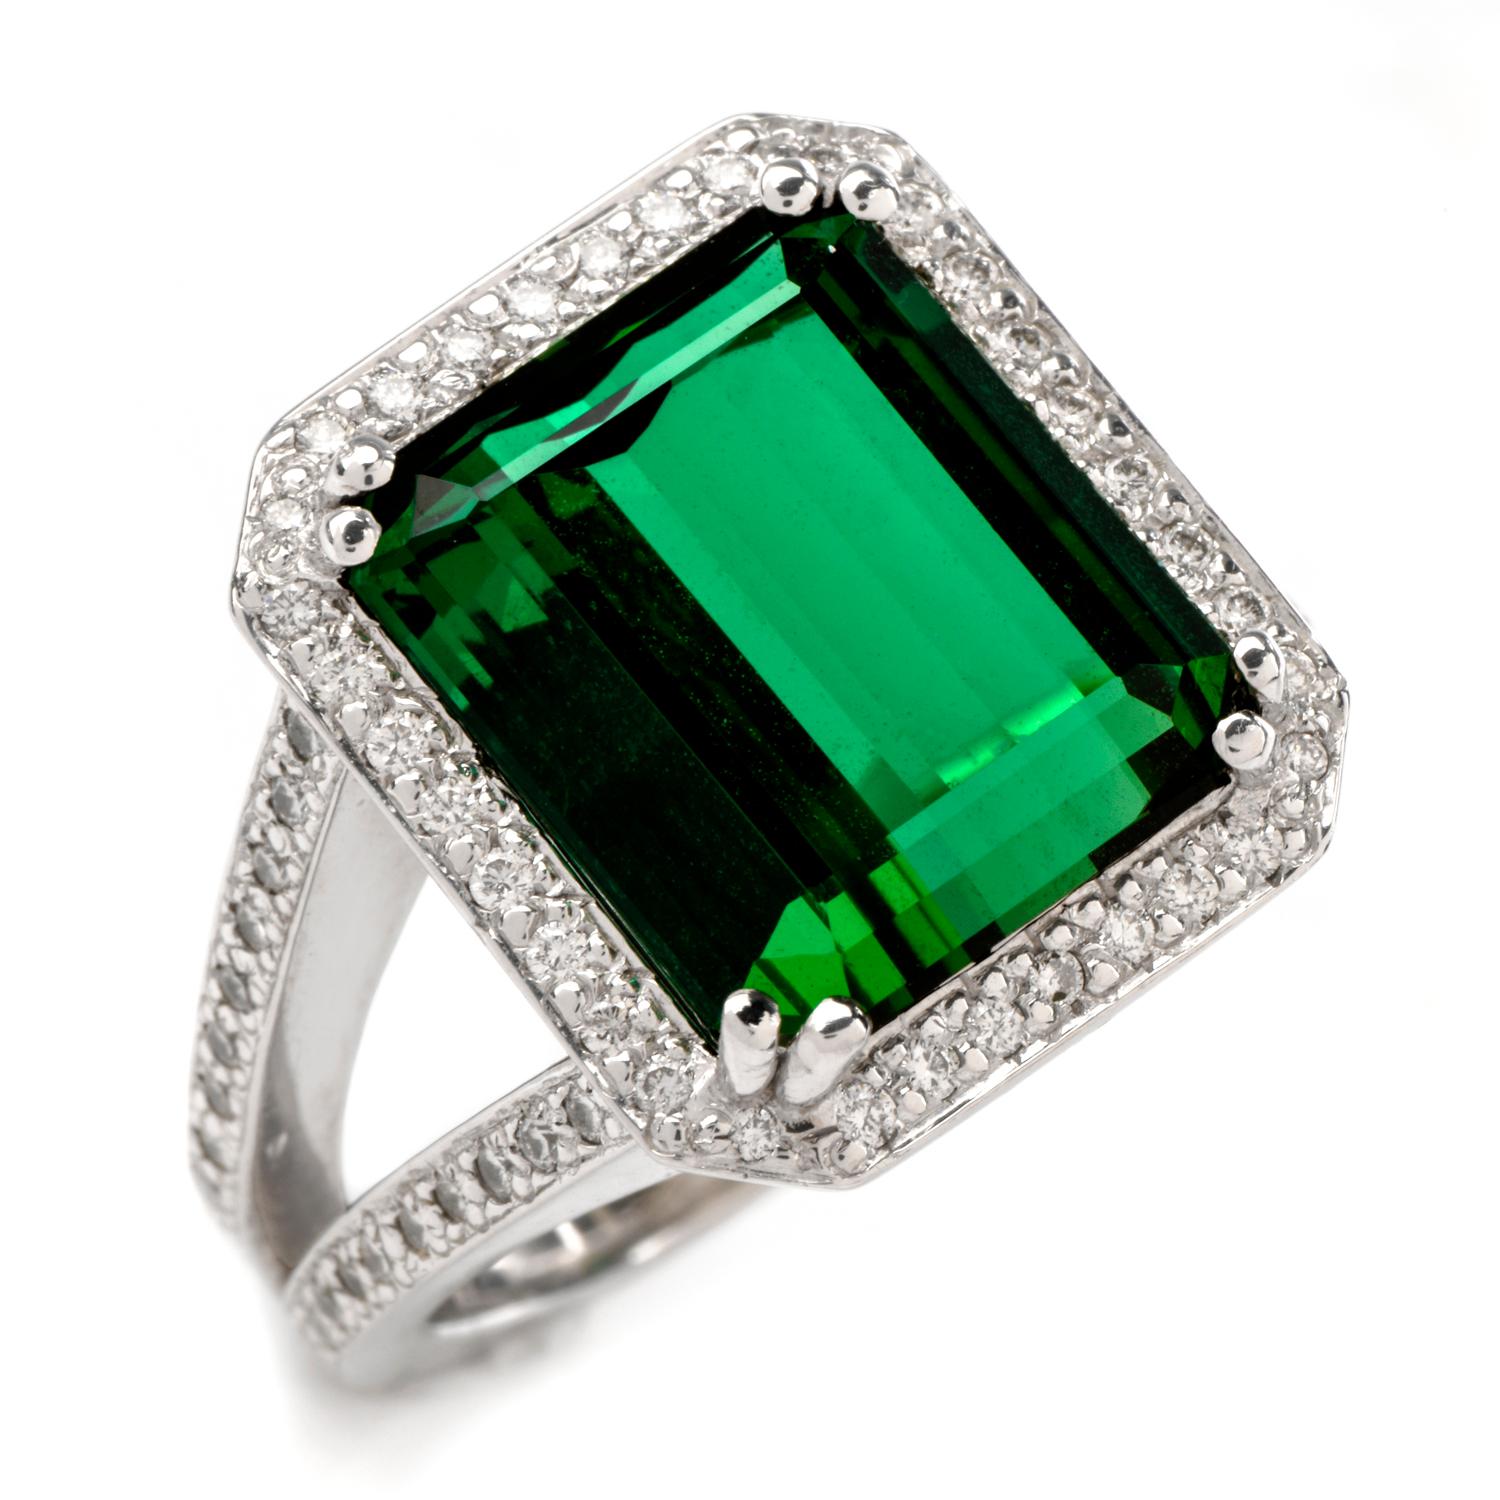 This bold tourmaline cocktail ring is crafted in solid 14-karat white gold, weighing 12.5 grams and measuring 17mm x 7mm high. Centered with one prominent emerald-cut green tourmaline, weighing approximately, 8.30 carats. Surrounded by a pave-set